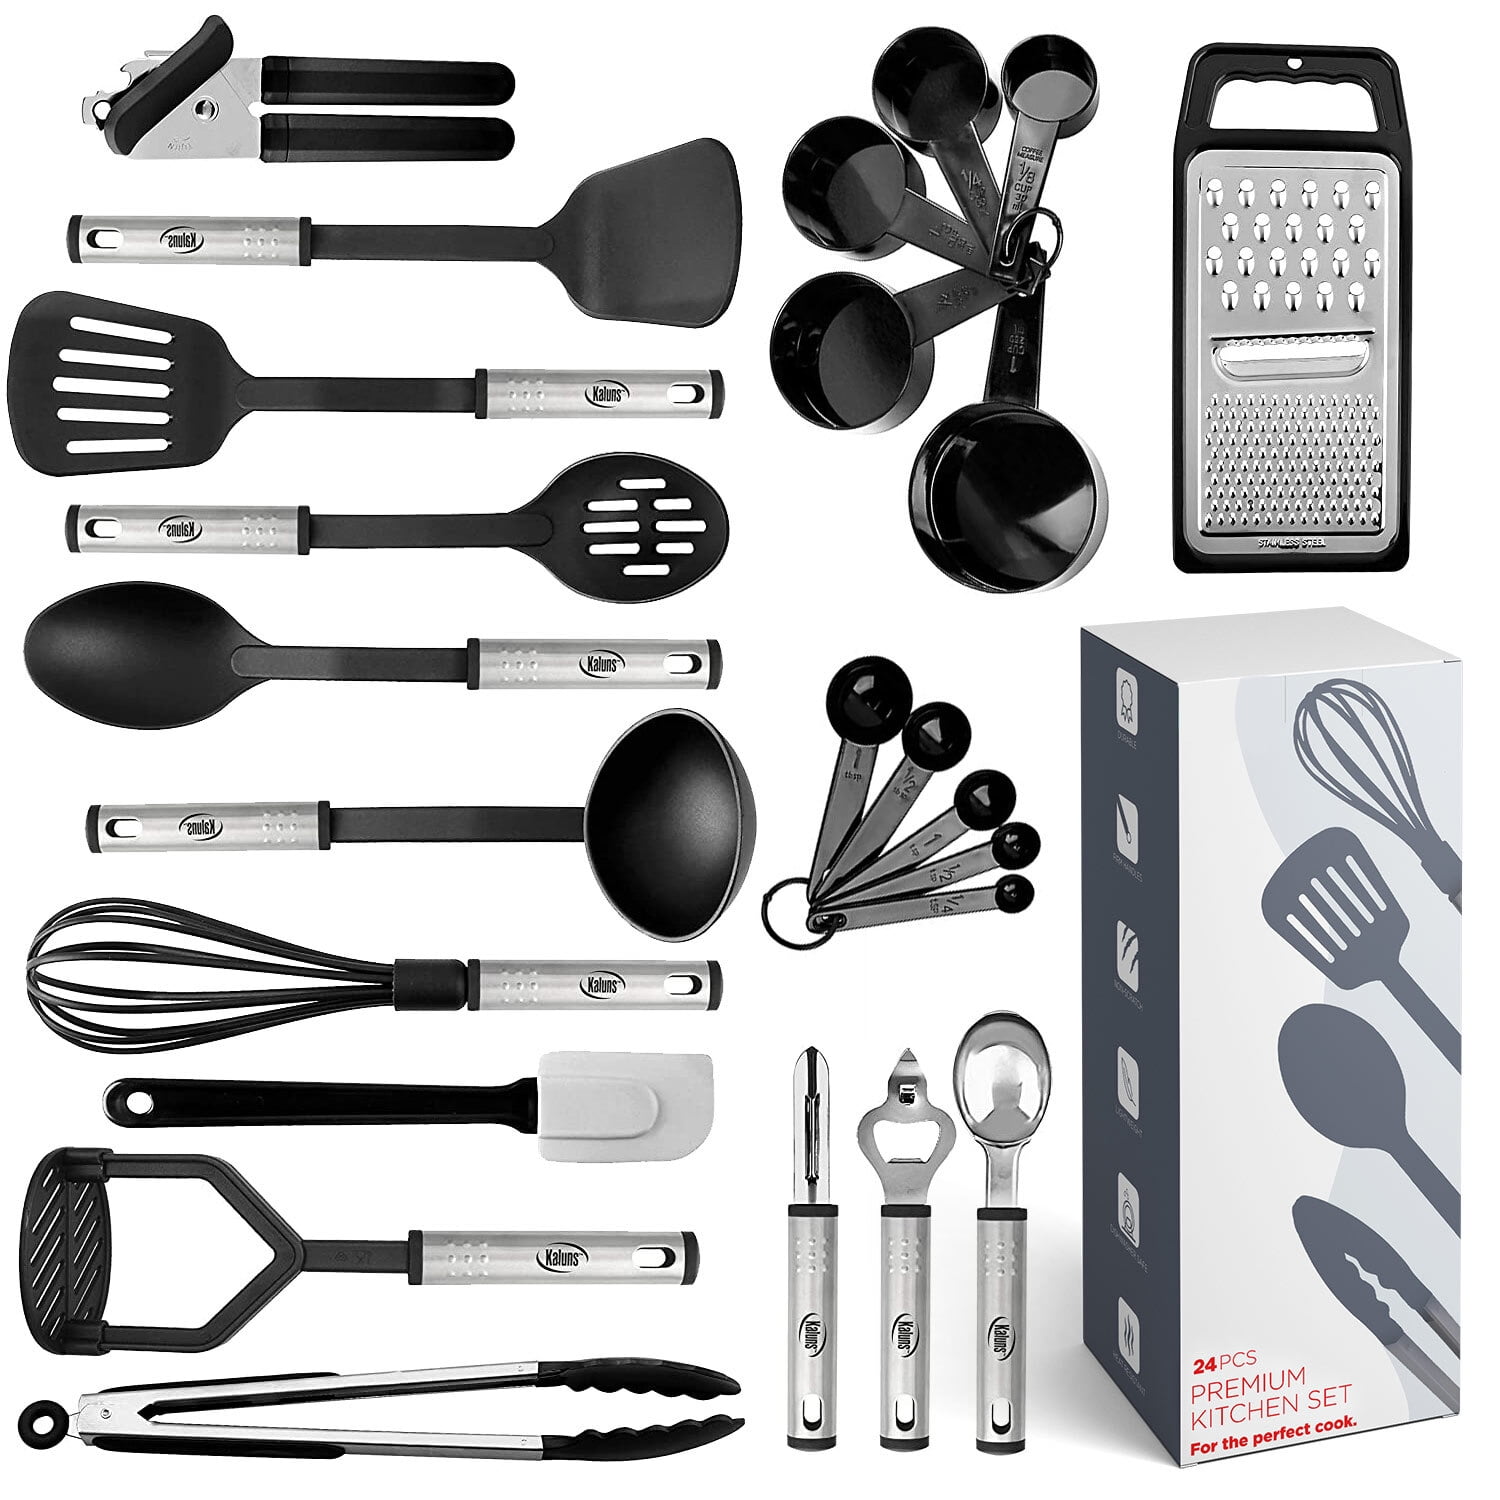 Eatex 39-Piece Nonstick Black Steel Bakeware Set with Black Utensil and Silicone Handles